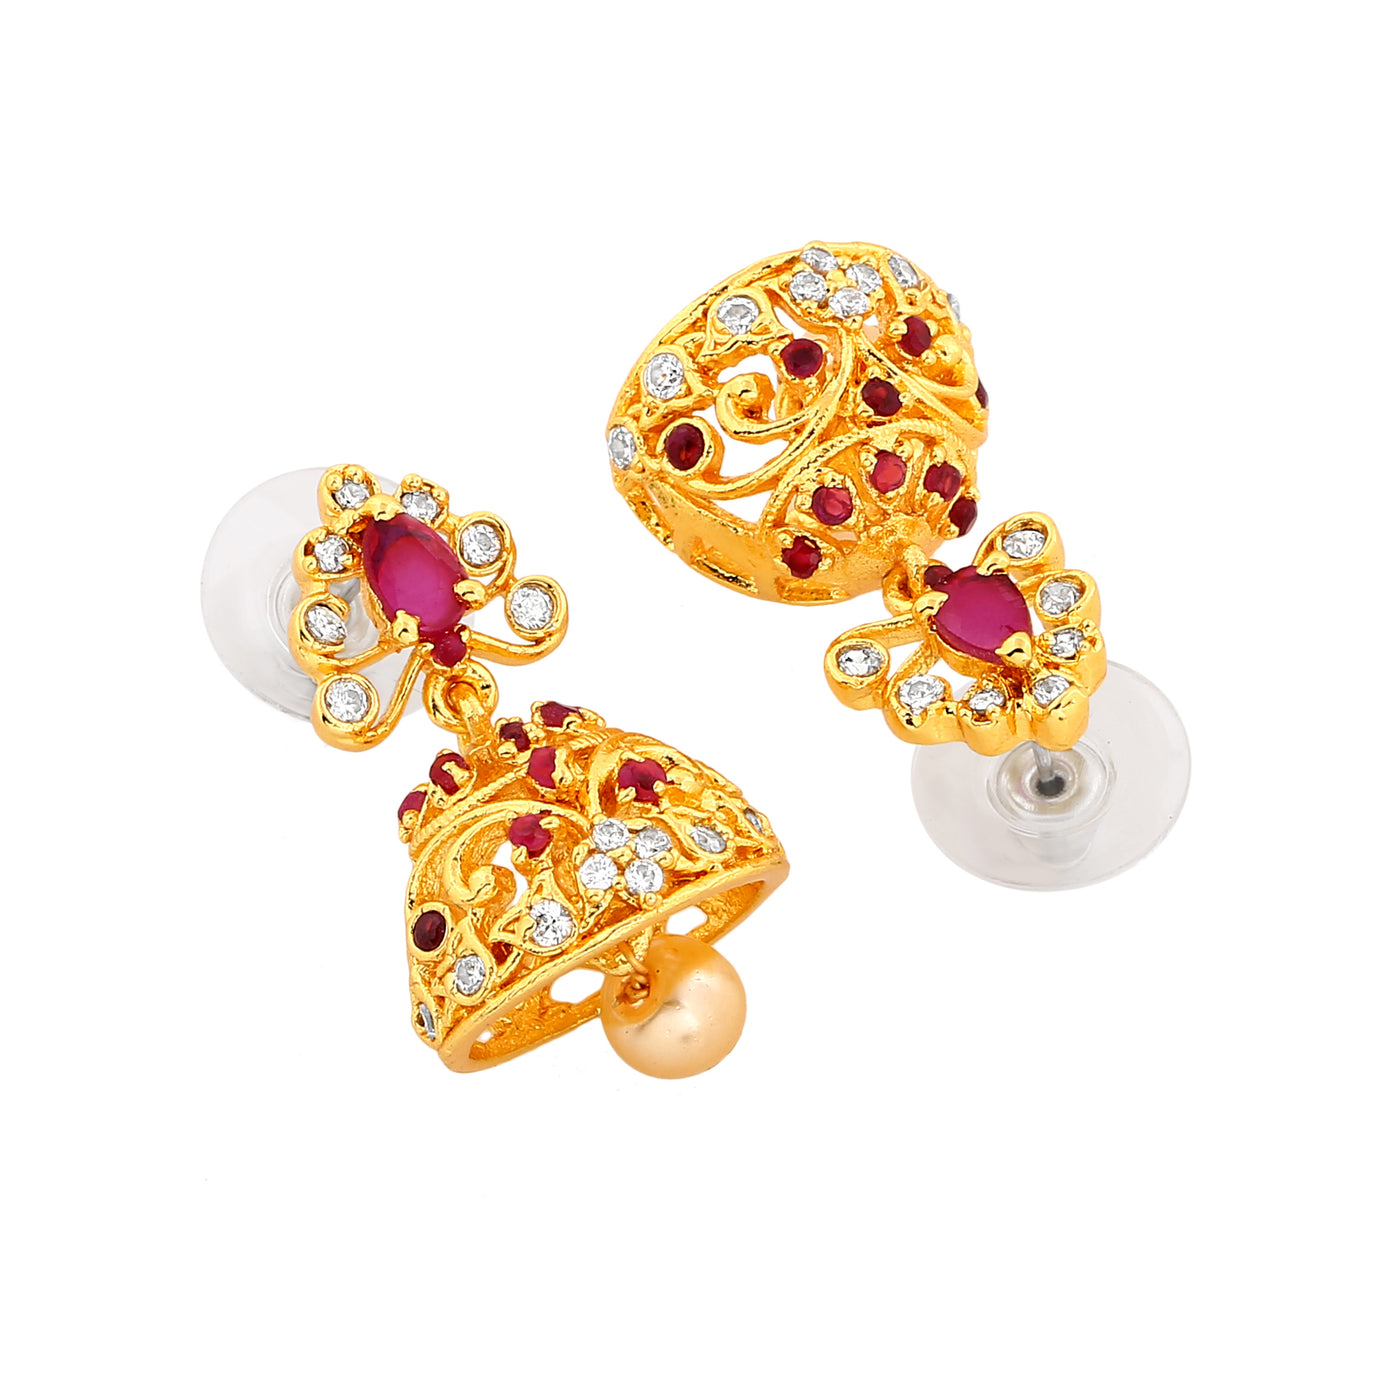 Estele Gold Plated CZ Sparkling Jhumki Earrings with Pearls & Pink Crystals for Women